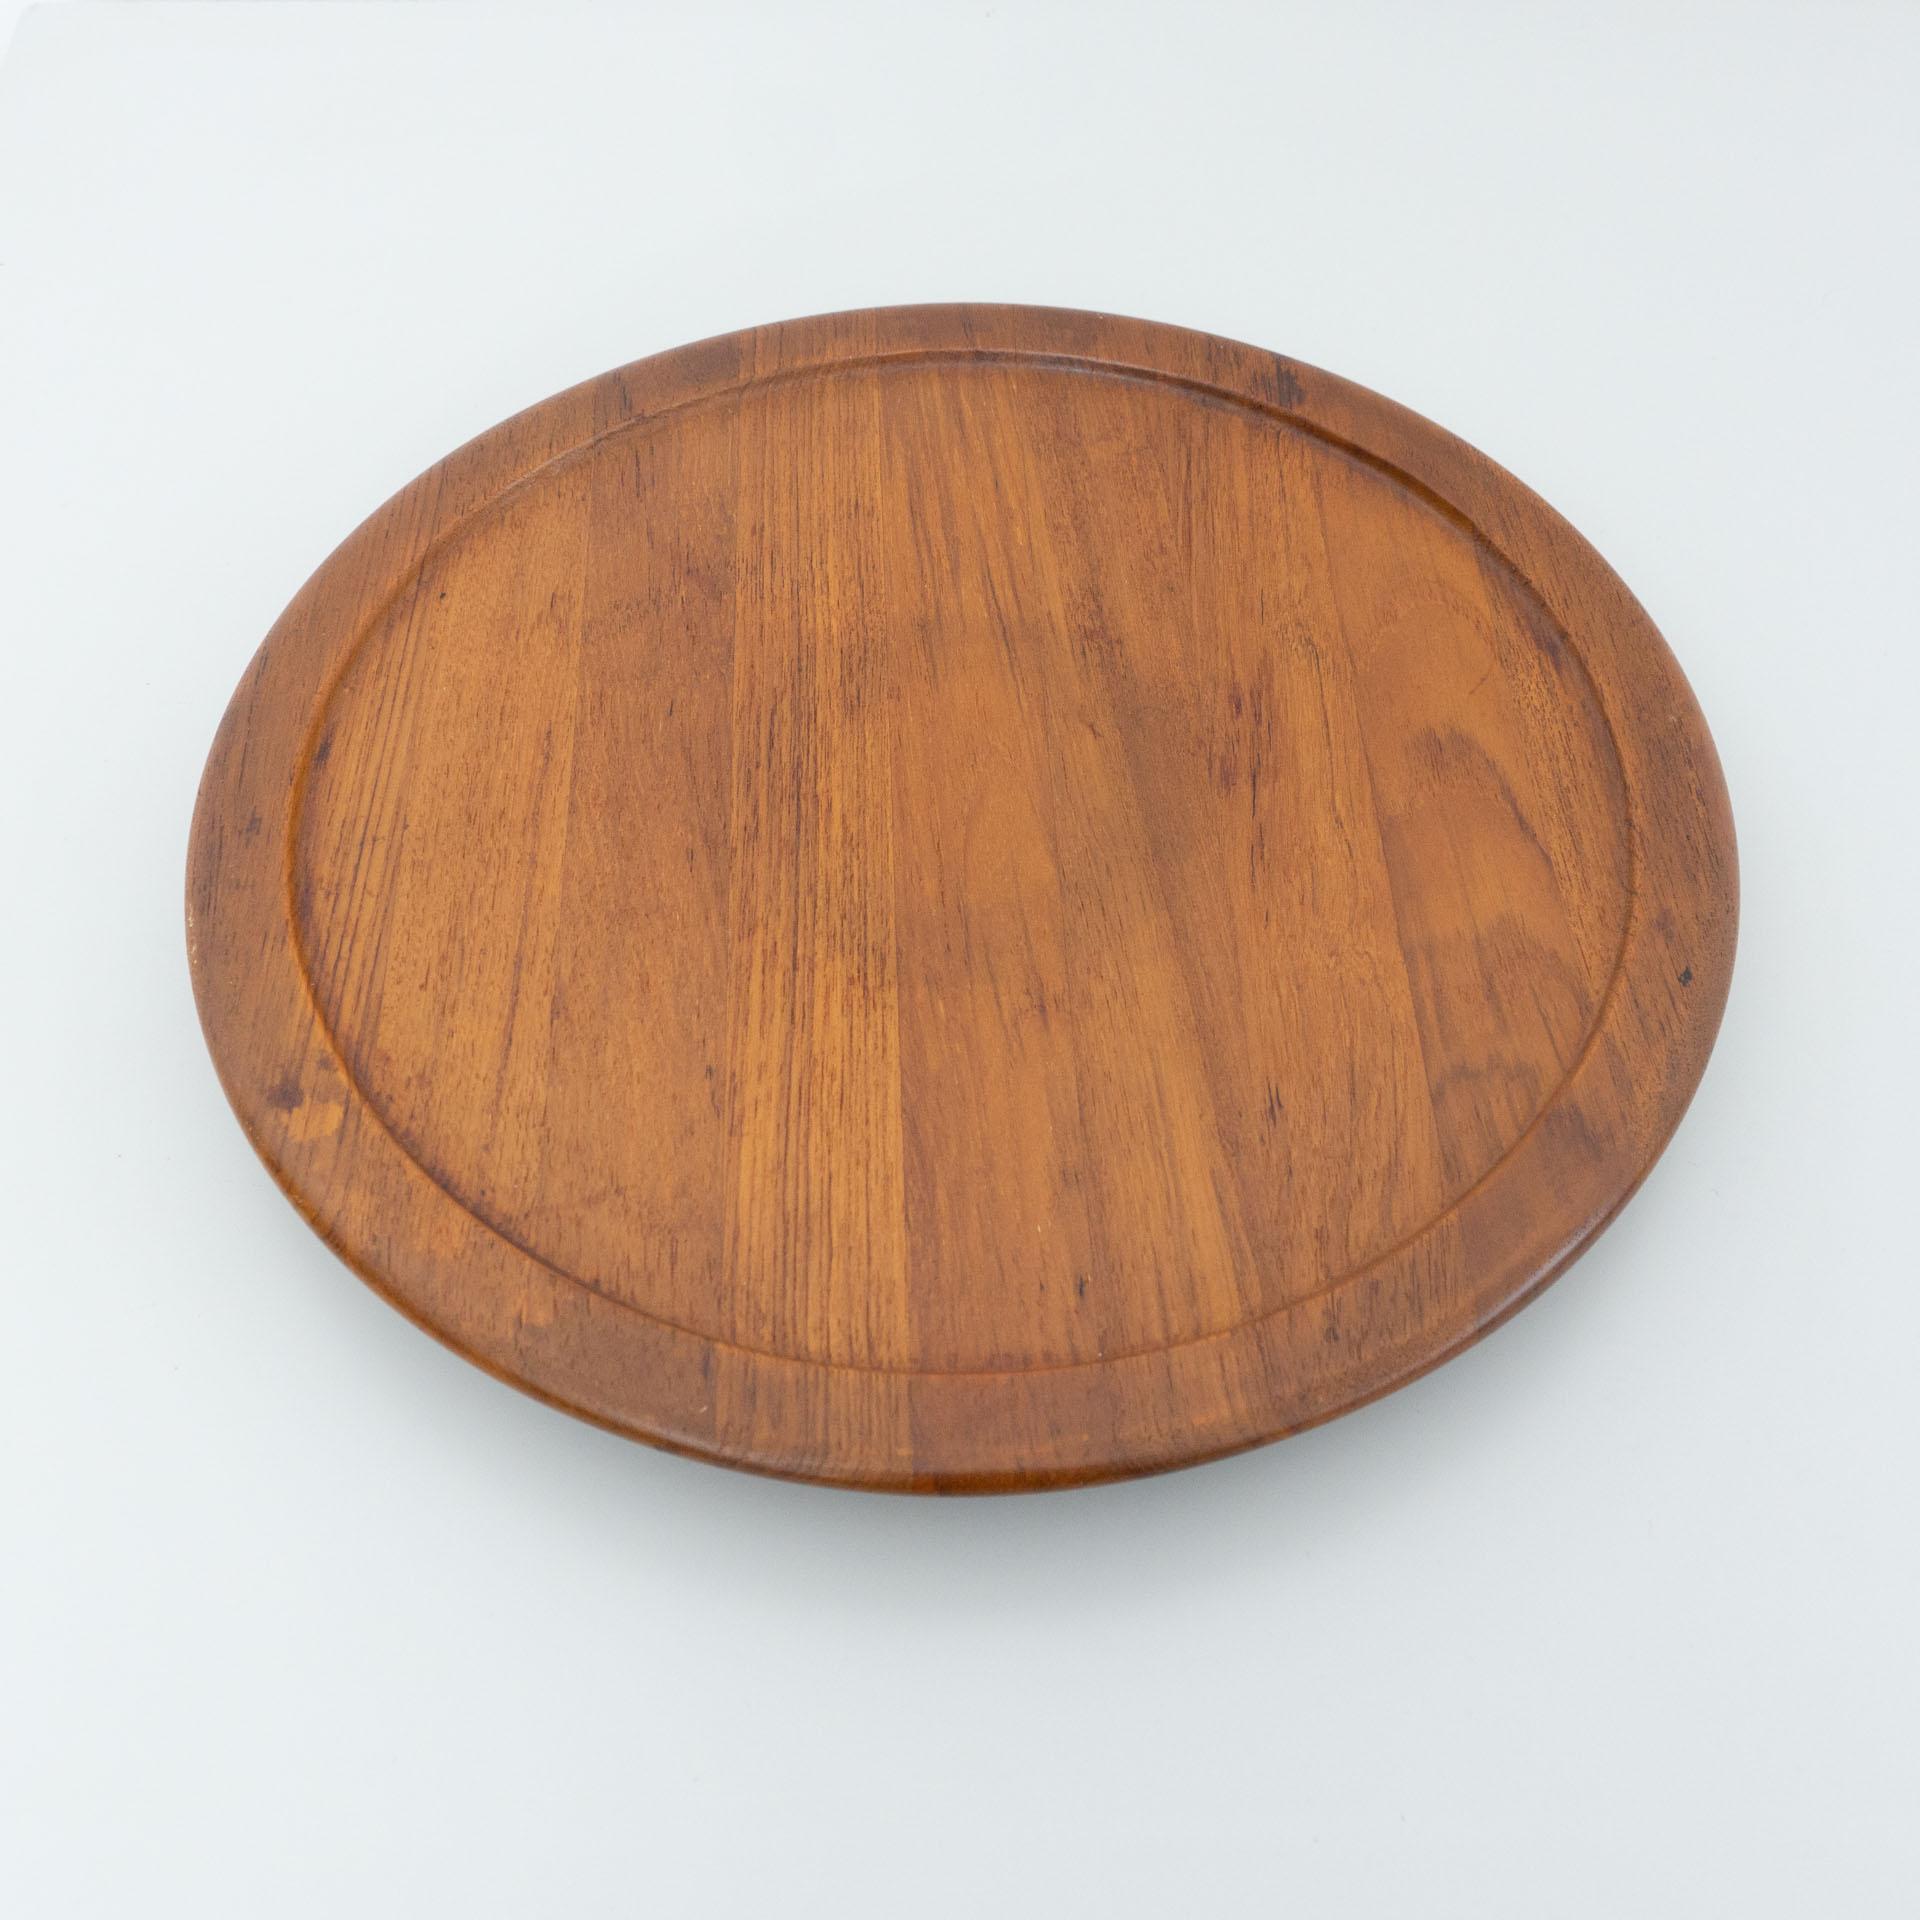 Swivel base by Digsmed, Denmark, circa 1960.

In original condition, with minor wear consistent with age and use, preserving a beautiful patina.

Material:
Wood

Dimensions:
ø 44.7 cm x H 4 cm.